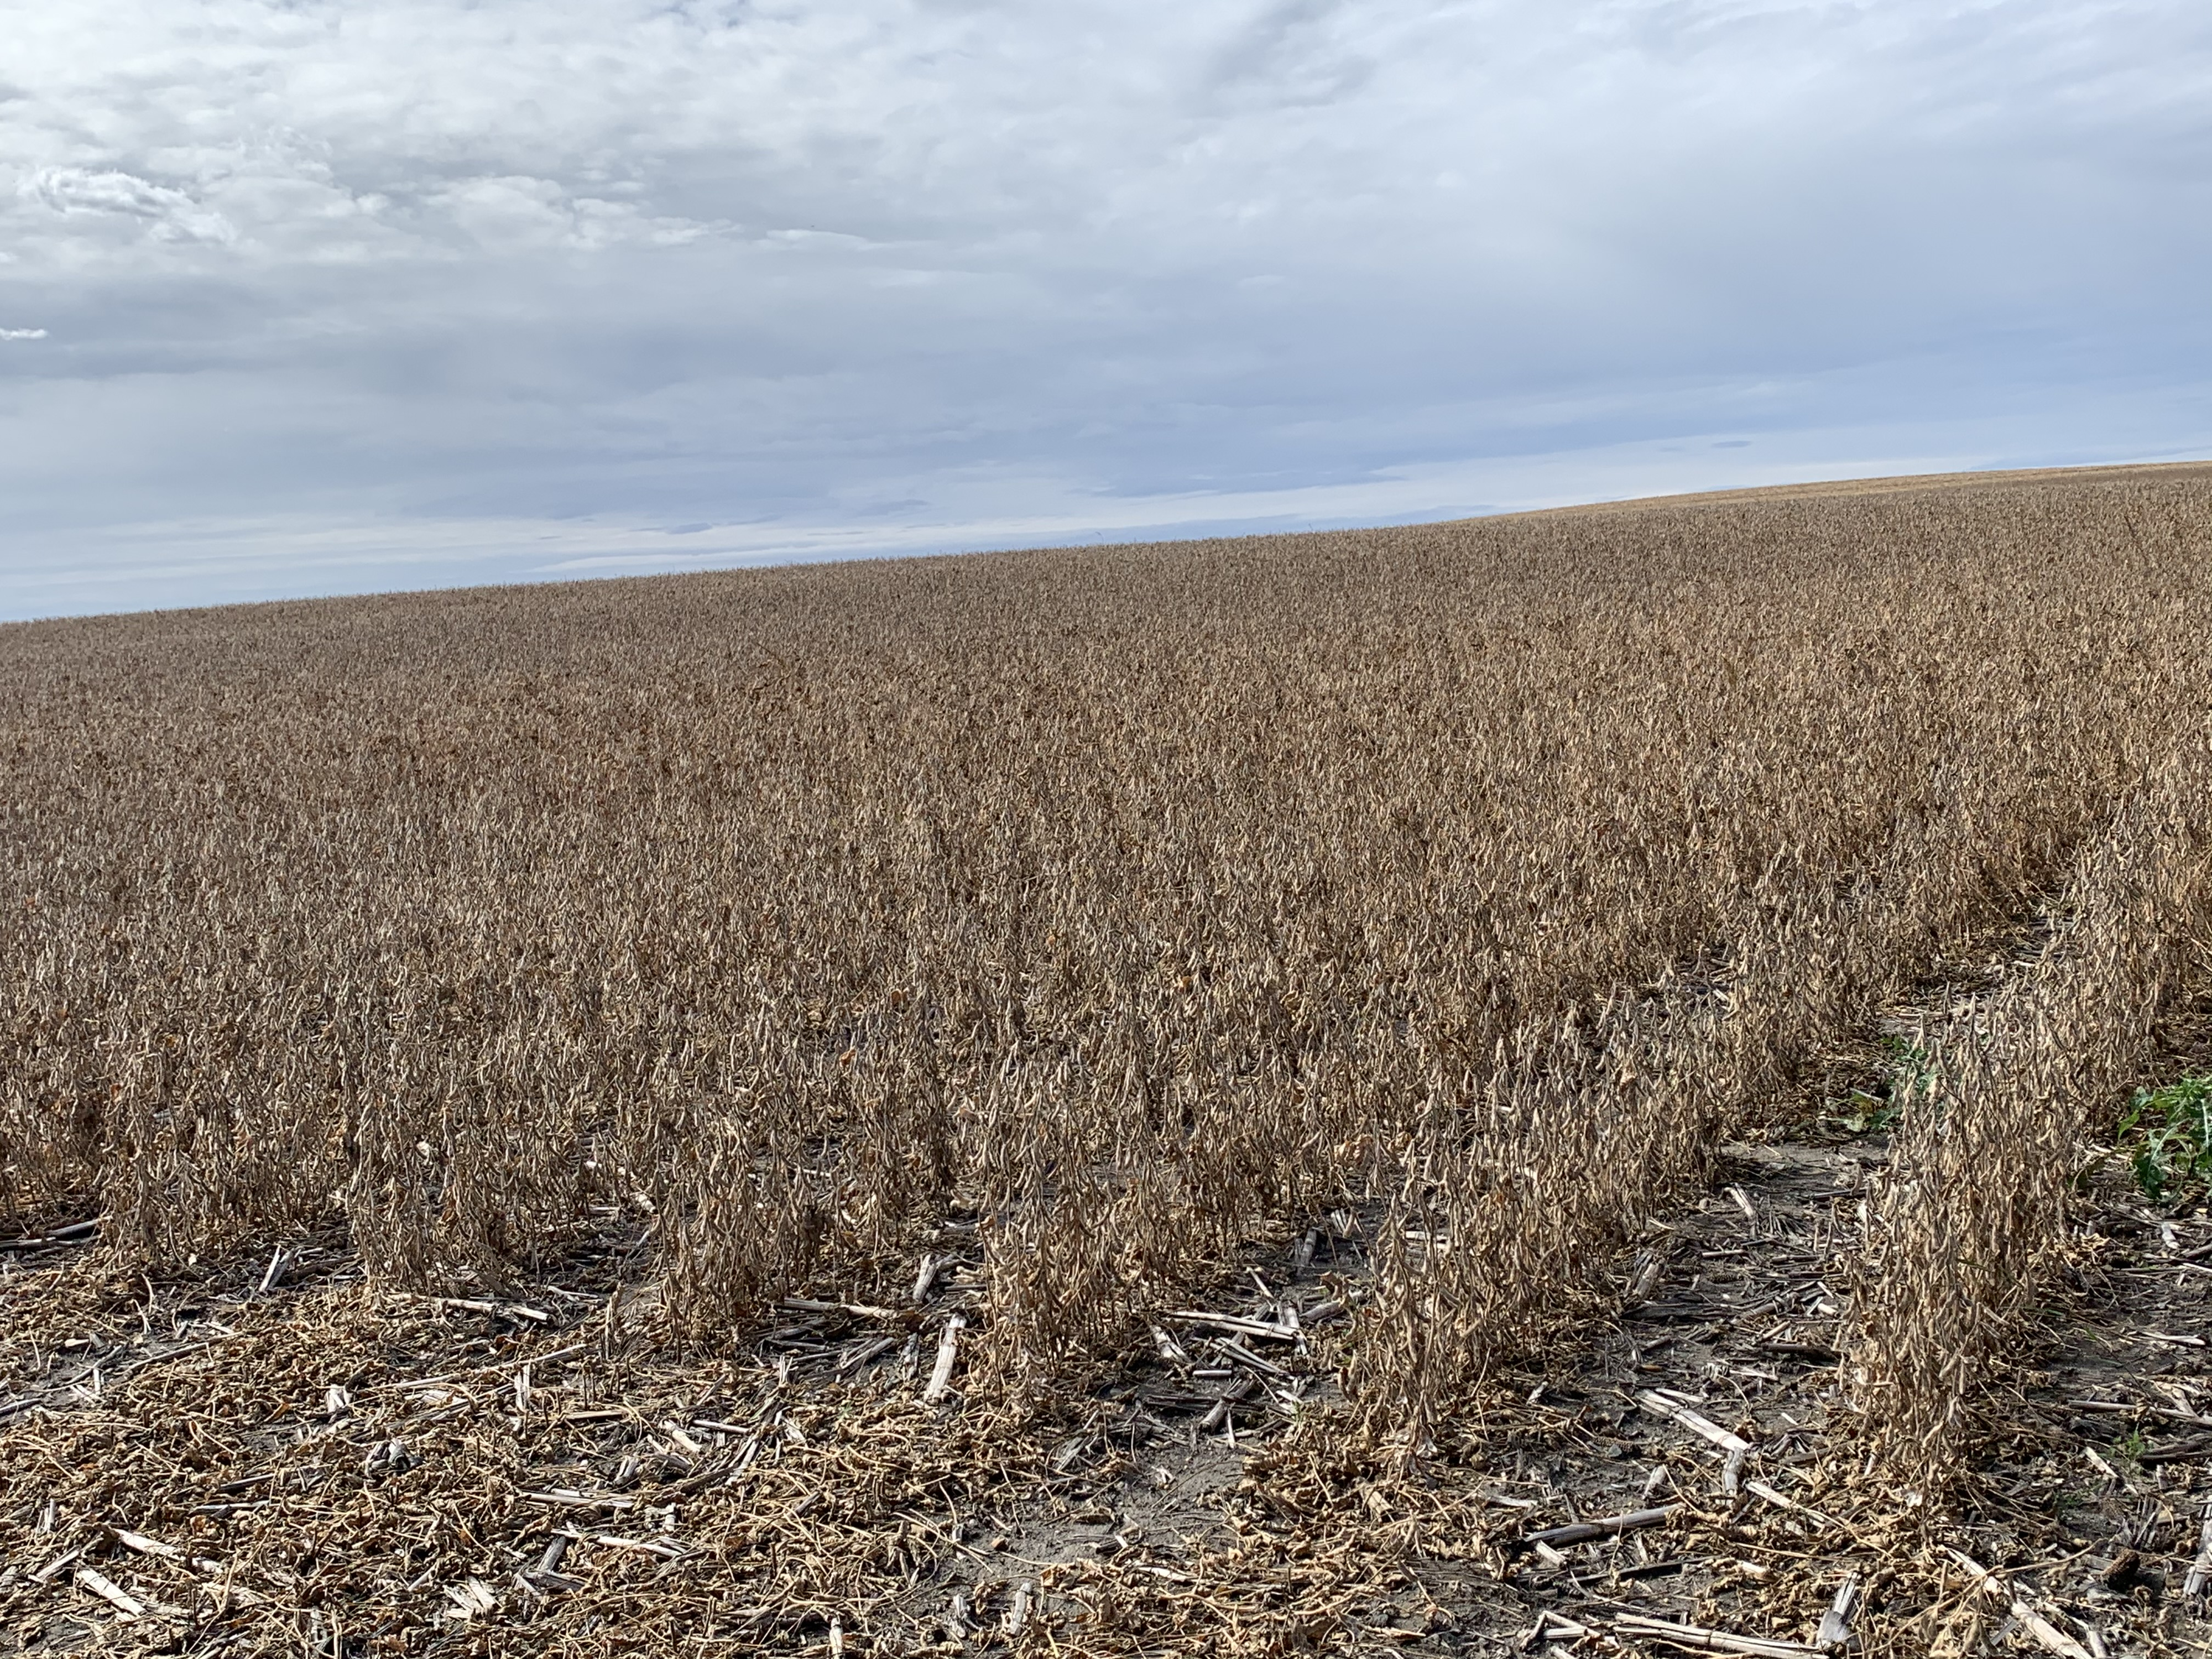 Afternoon Ag News, February 9, 2022: NDSU Extension releases it 2022 short and long term ag planning price projections for ND